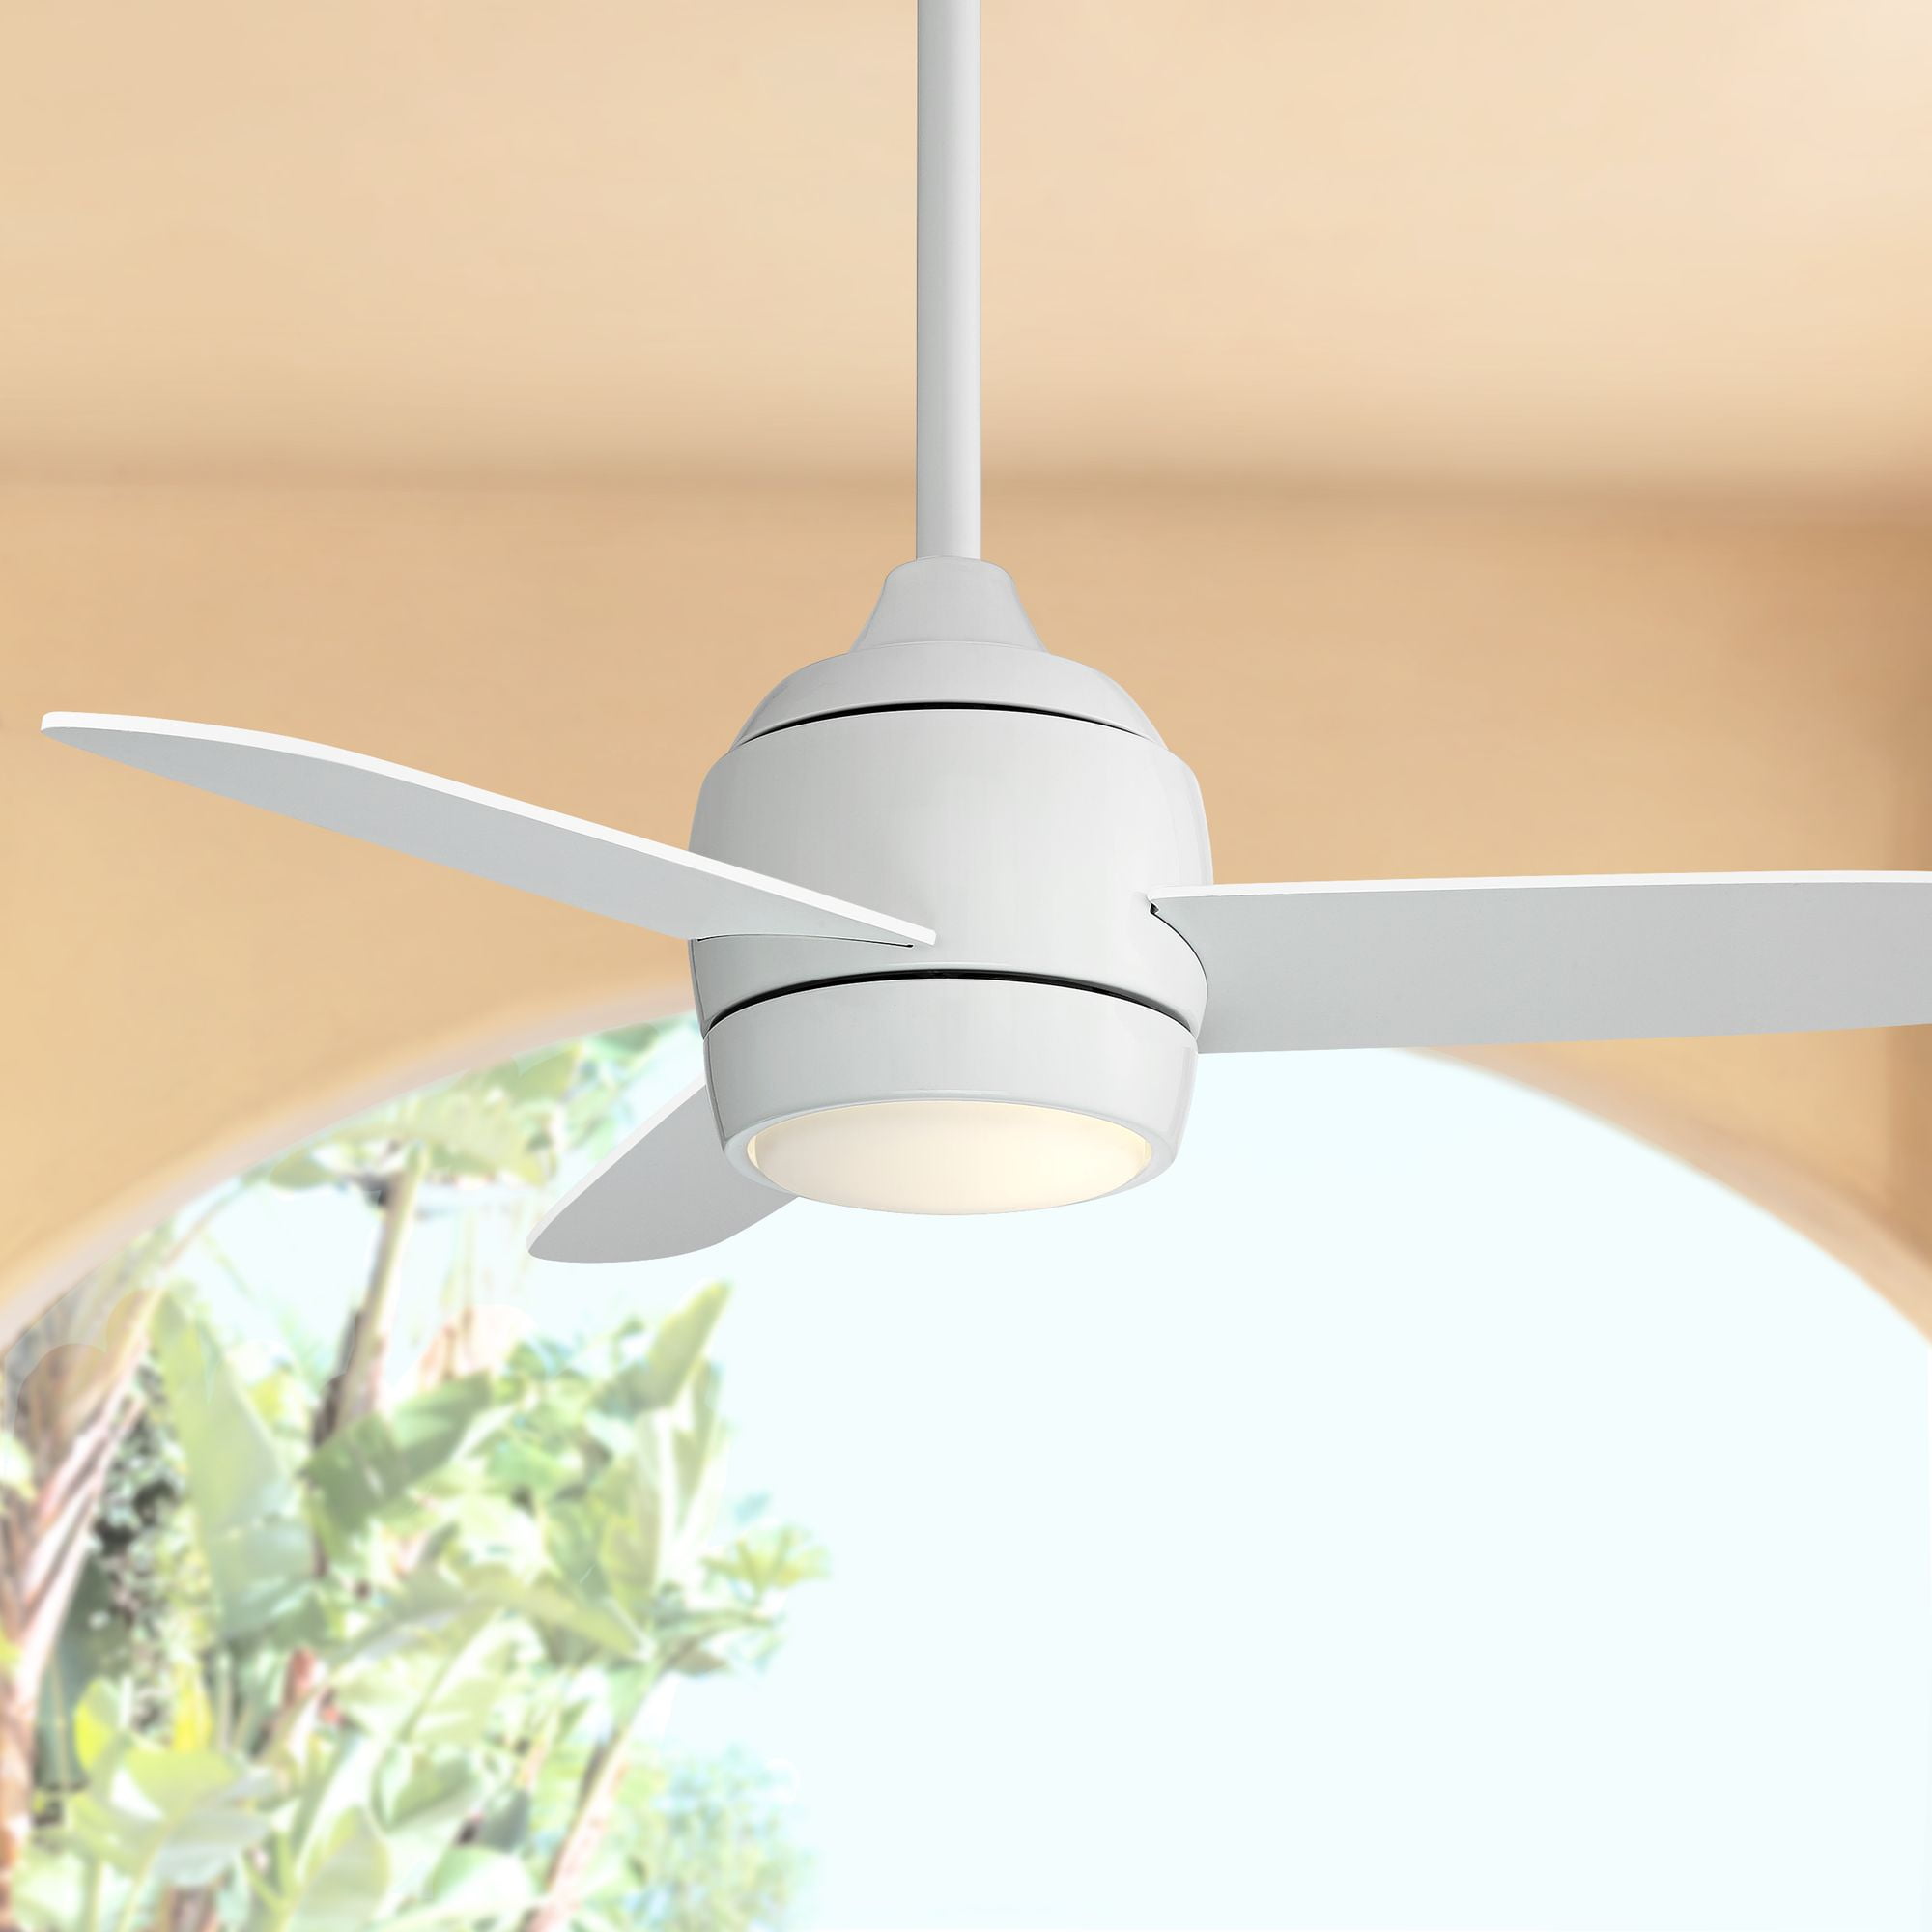 36" Casa Vieja Modern Outdoor Ceiling Fan with Light LED ...